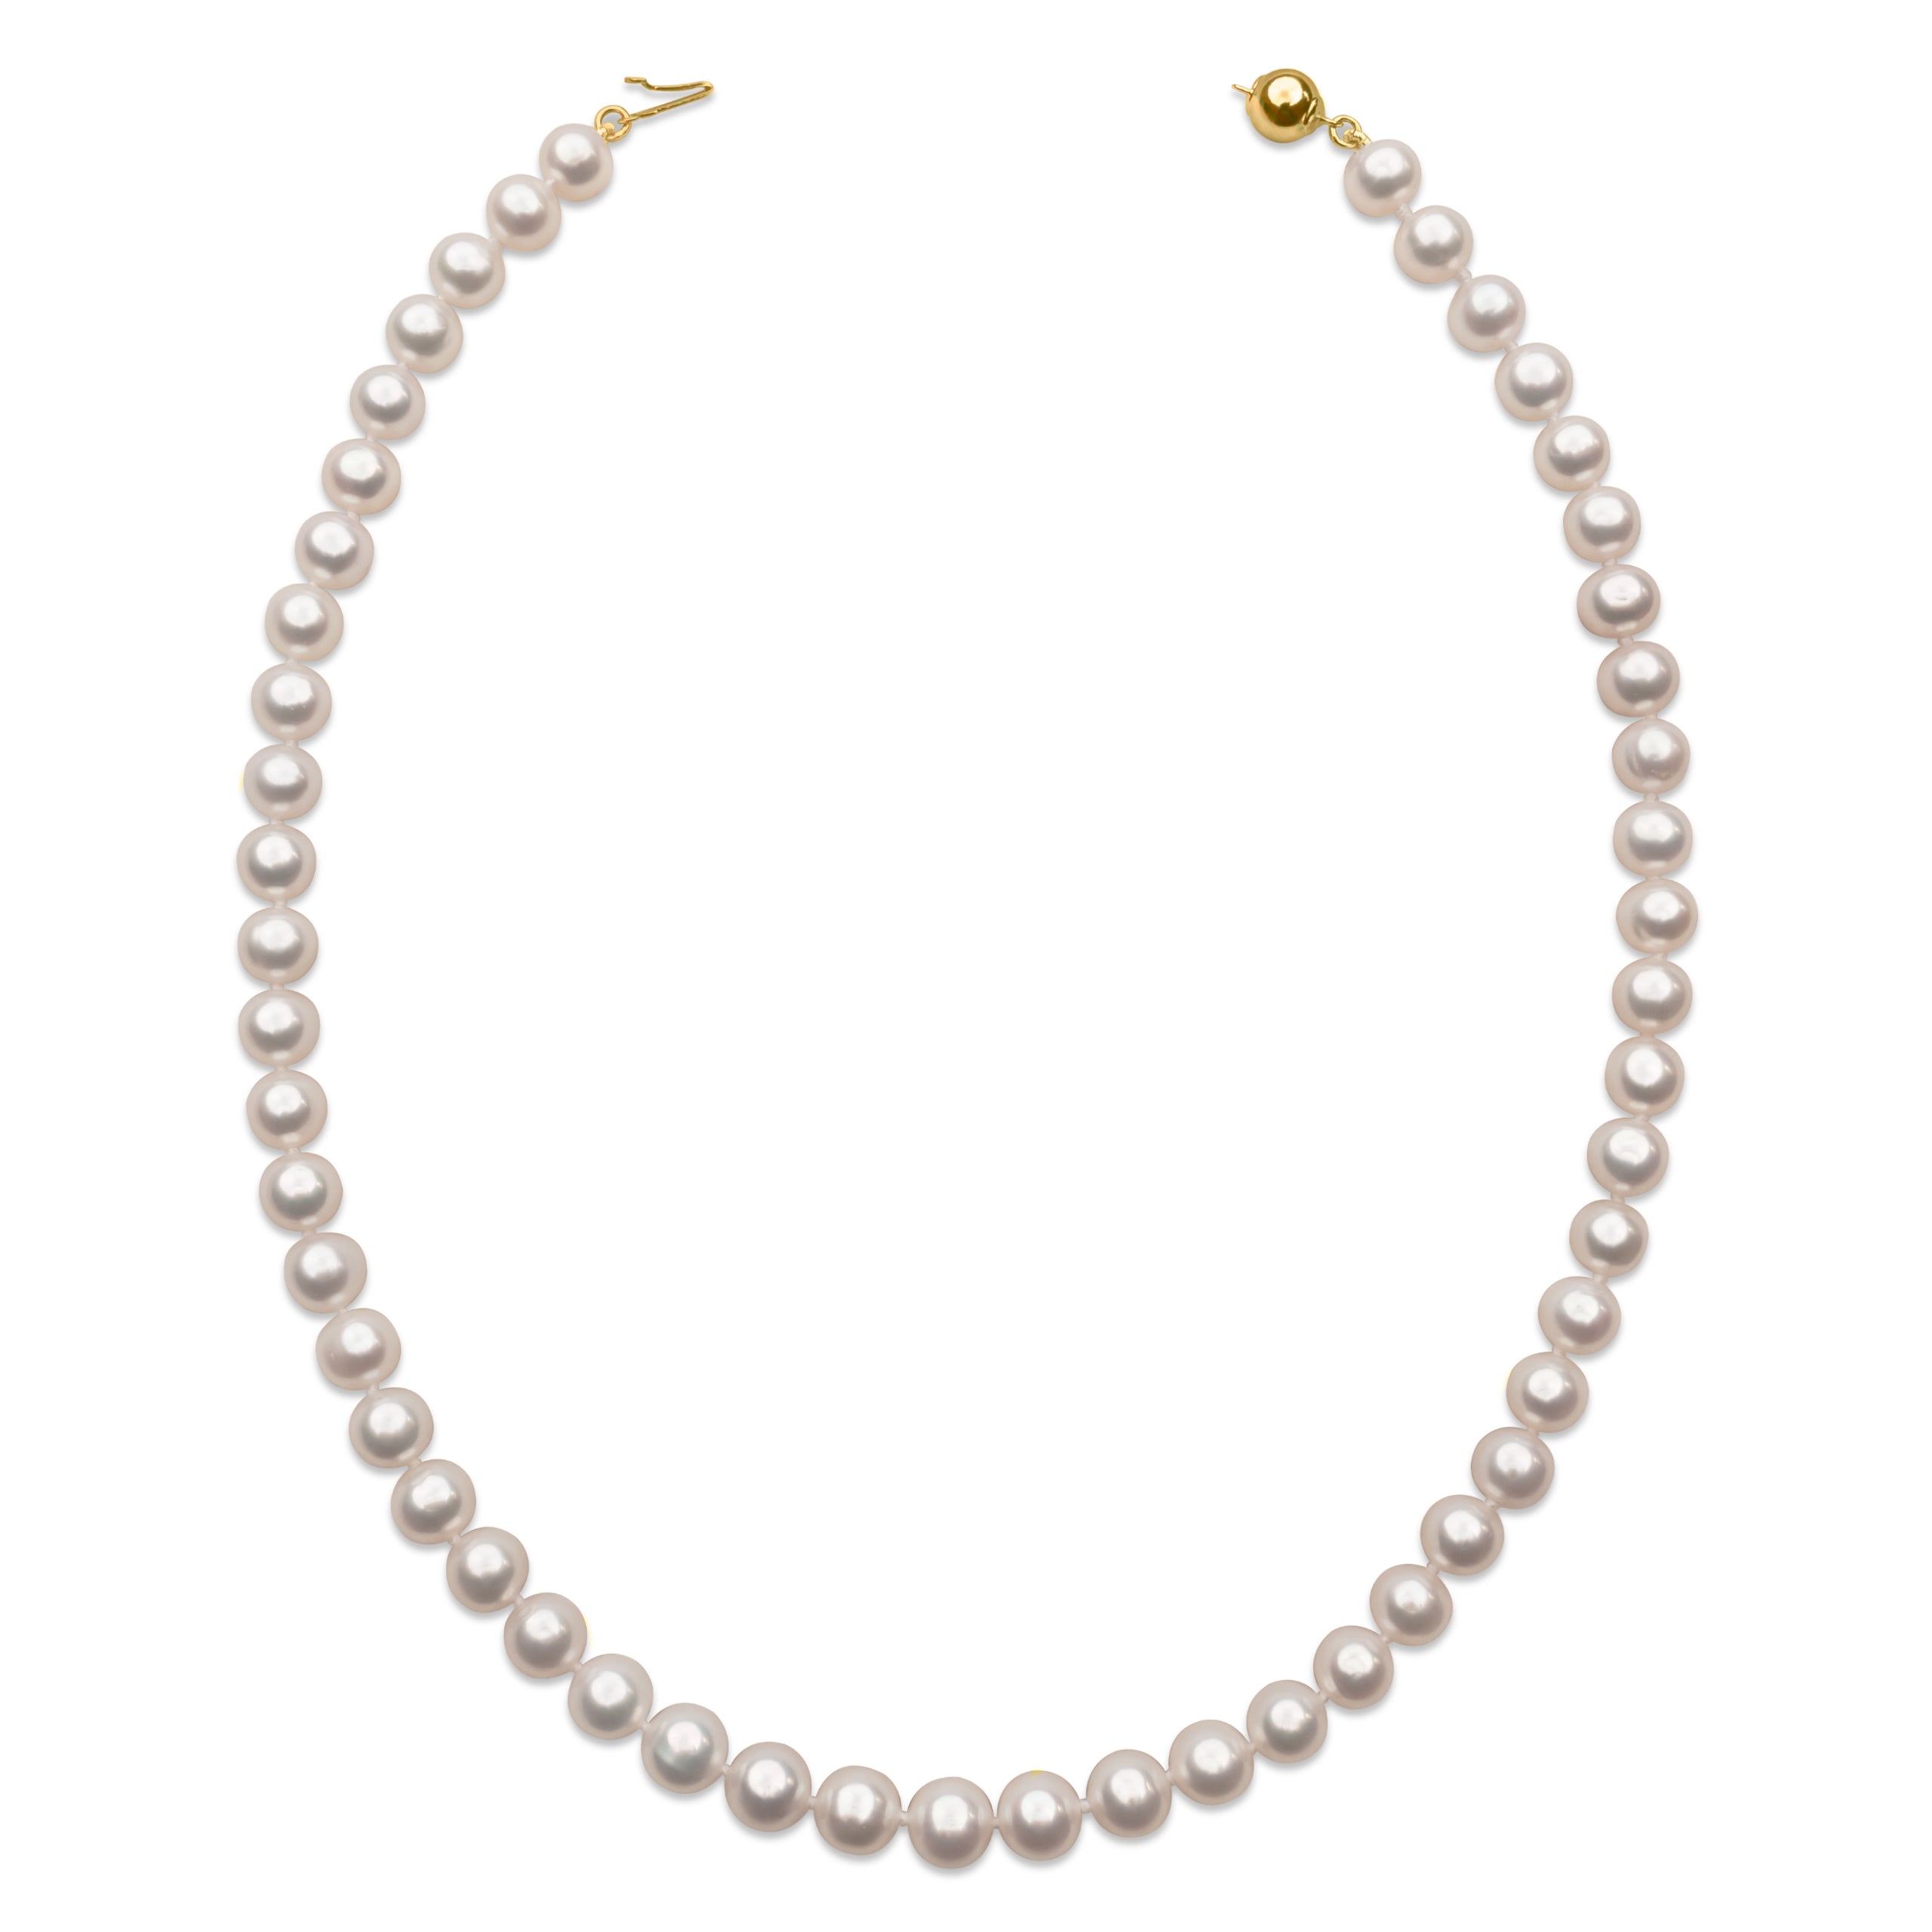 7.5-8.5 mm AA+ Freshwater Cultured Pearl Necklace 42 cm long | 18K Gold